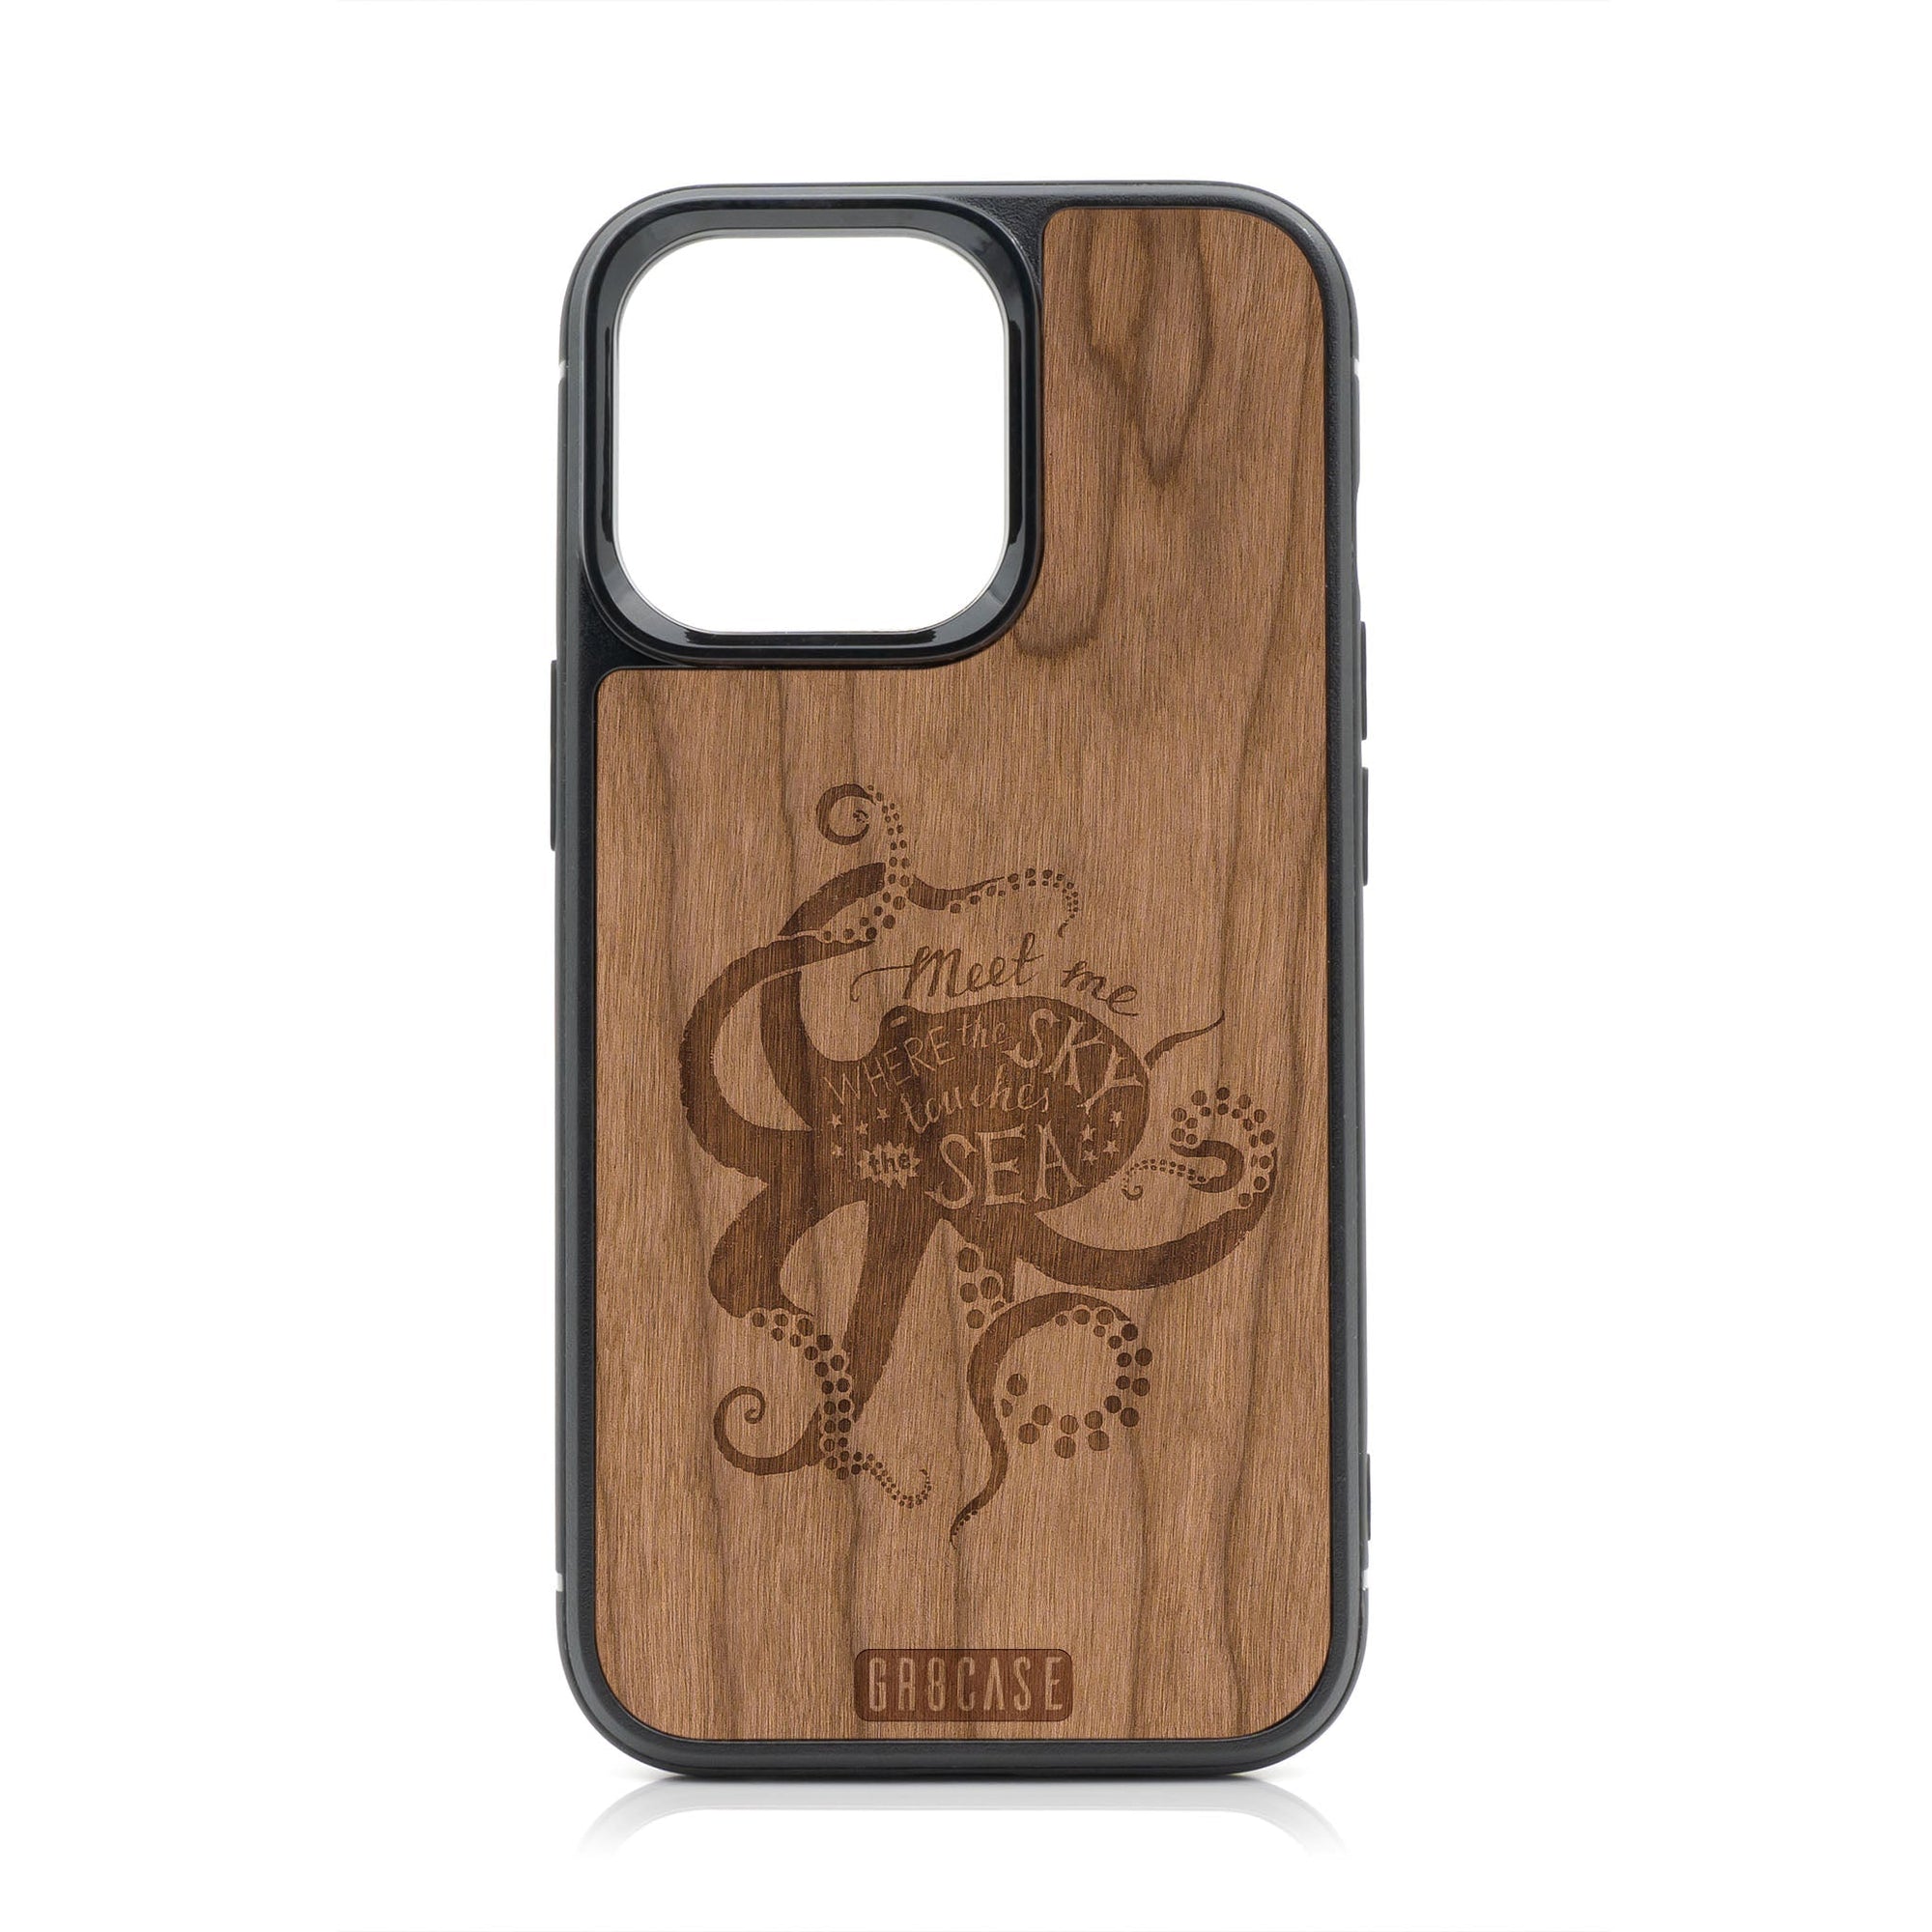 Meet Me Where The Sky Touches The Sea (Octopus) Design Wood Case For iPhone 15 Pro